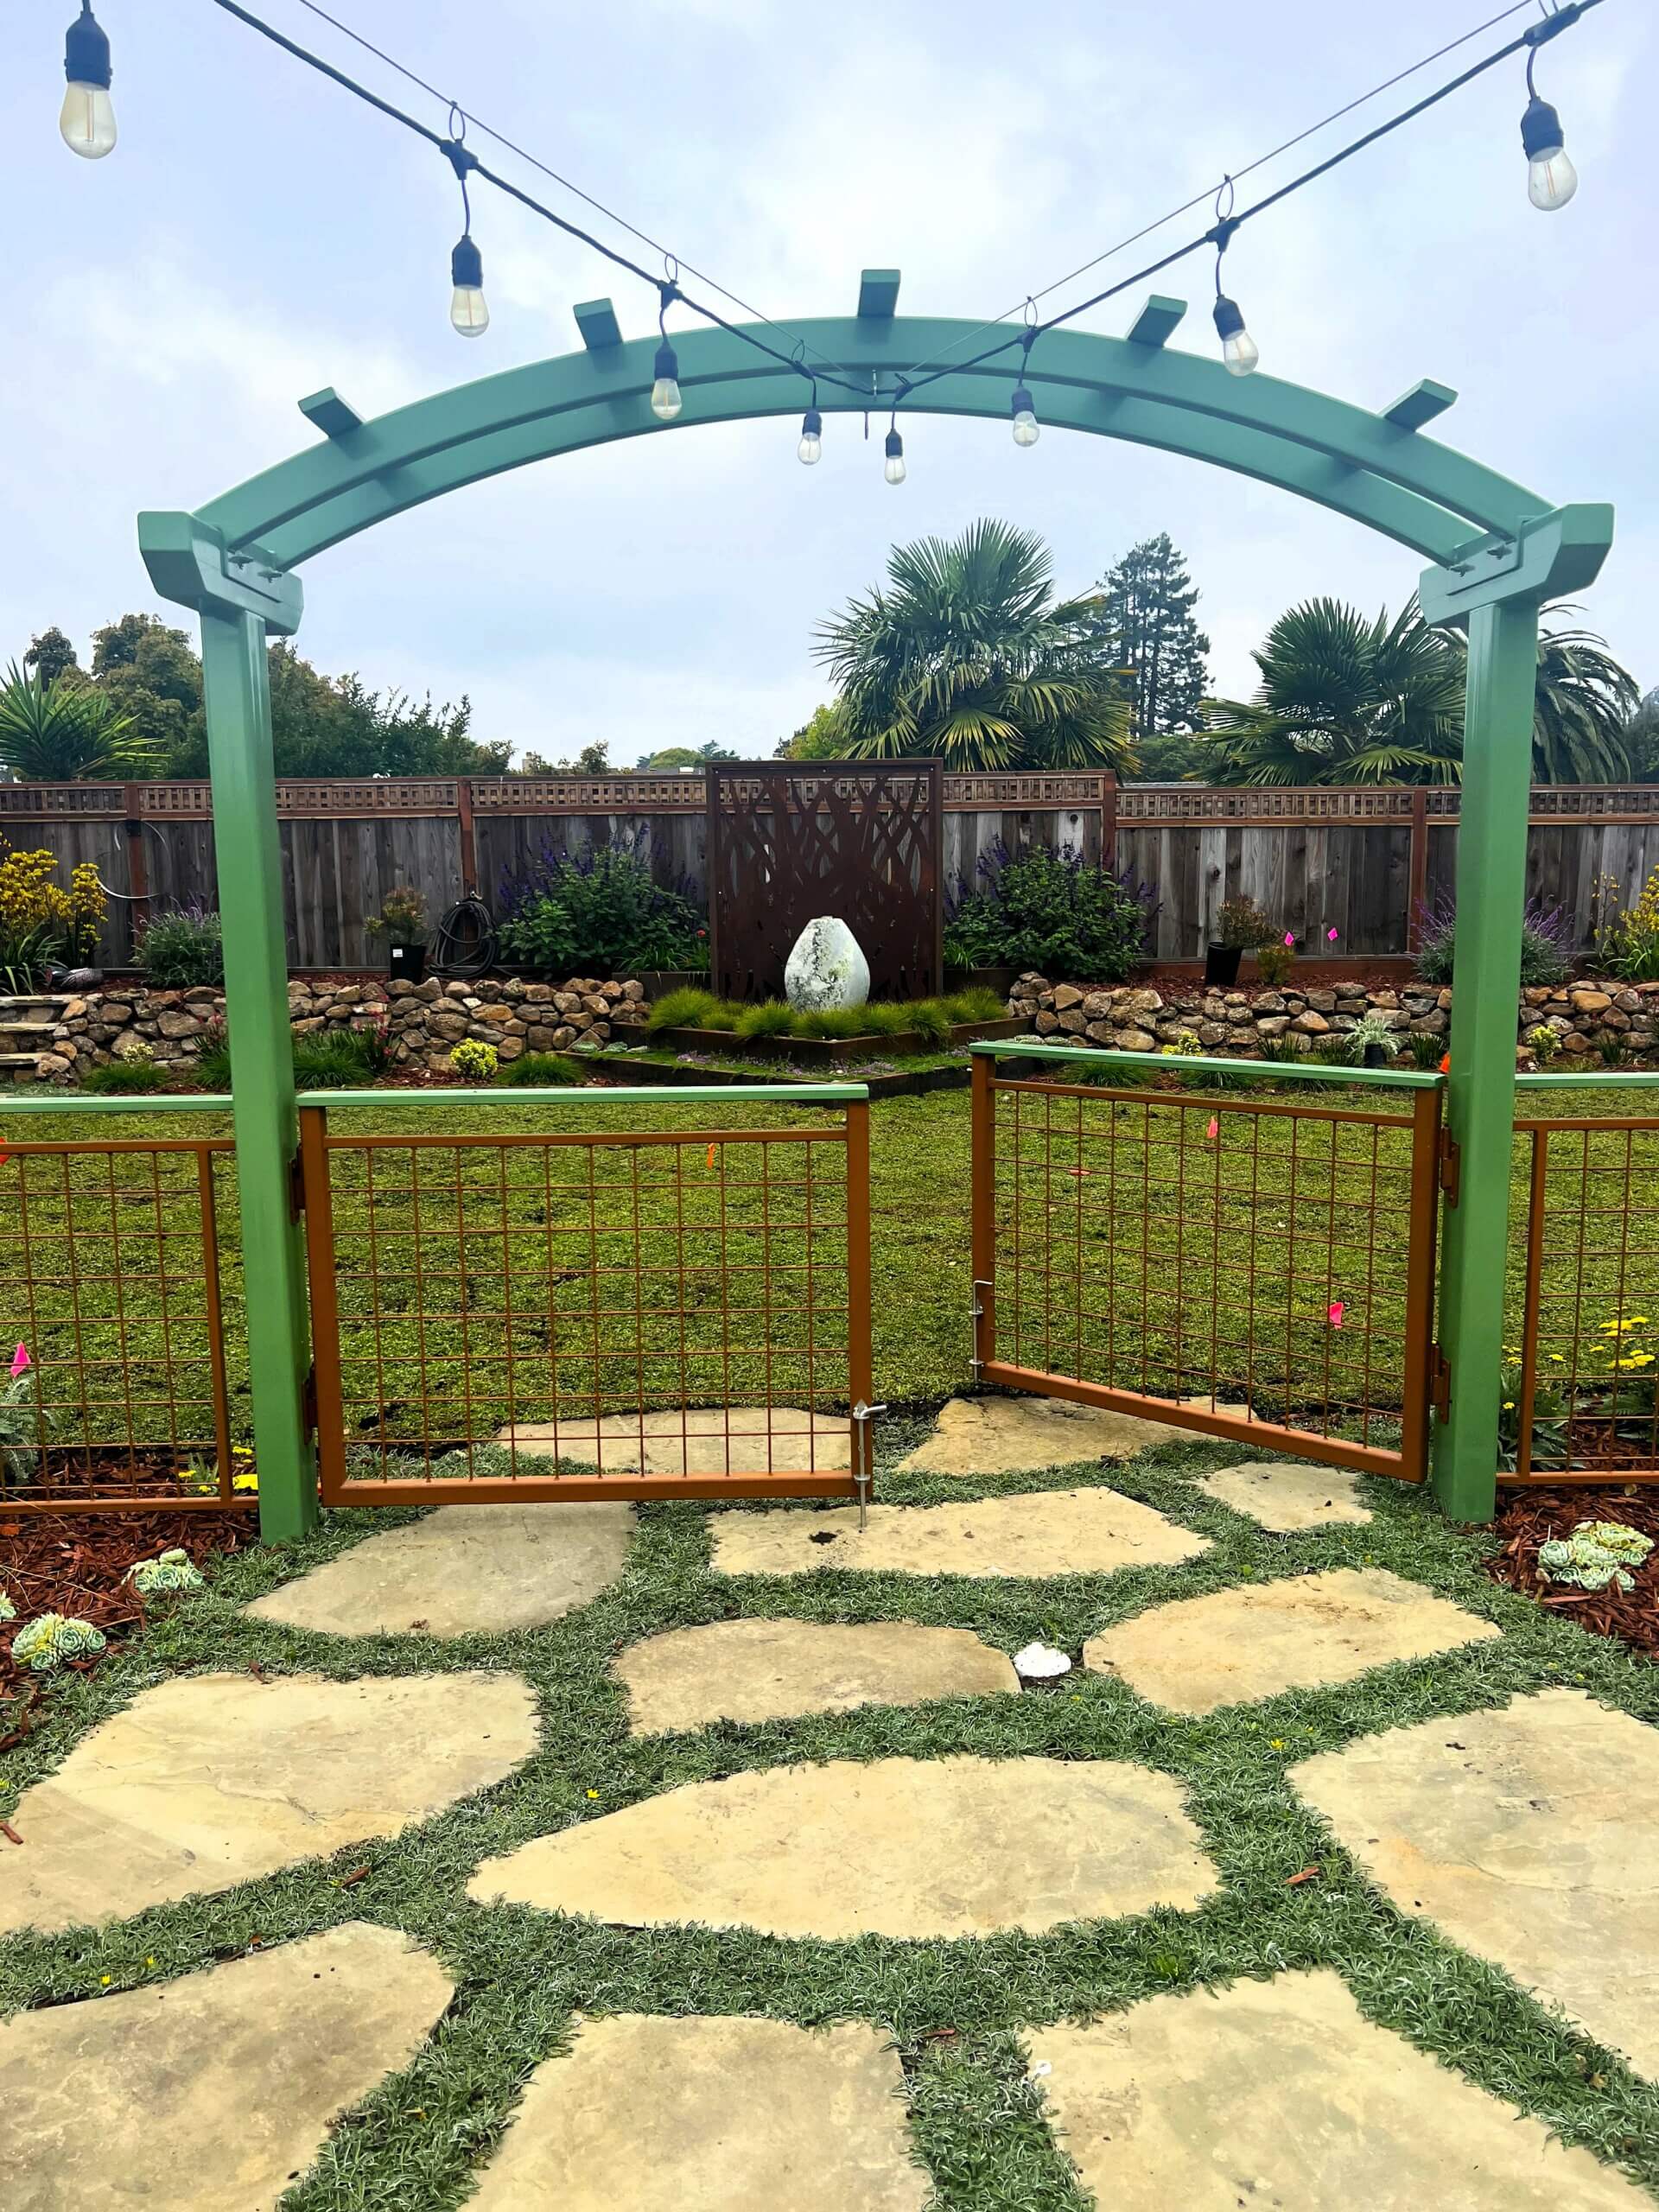 Green arbor with powder coat metal fence painted in green accents